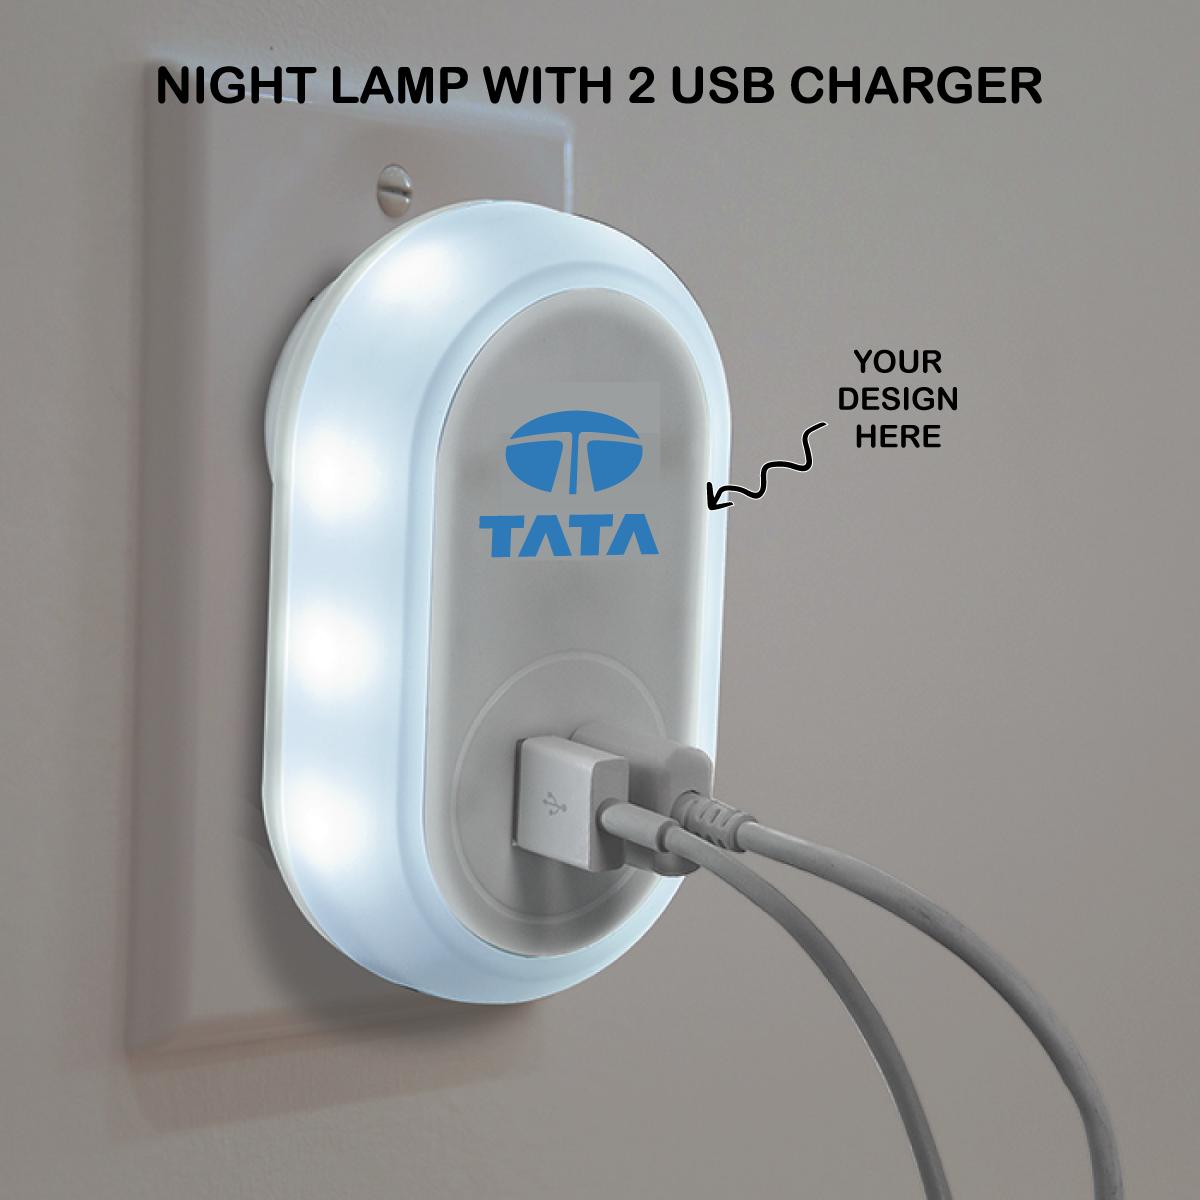 Personalized 2in1 Night Lamp With 2 USB Charger - For Corporate Gifting, Return Gift, Event Gifting, Promotional Item, Exhibition Gifting - LO-GA08